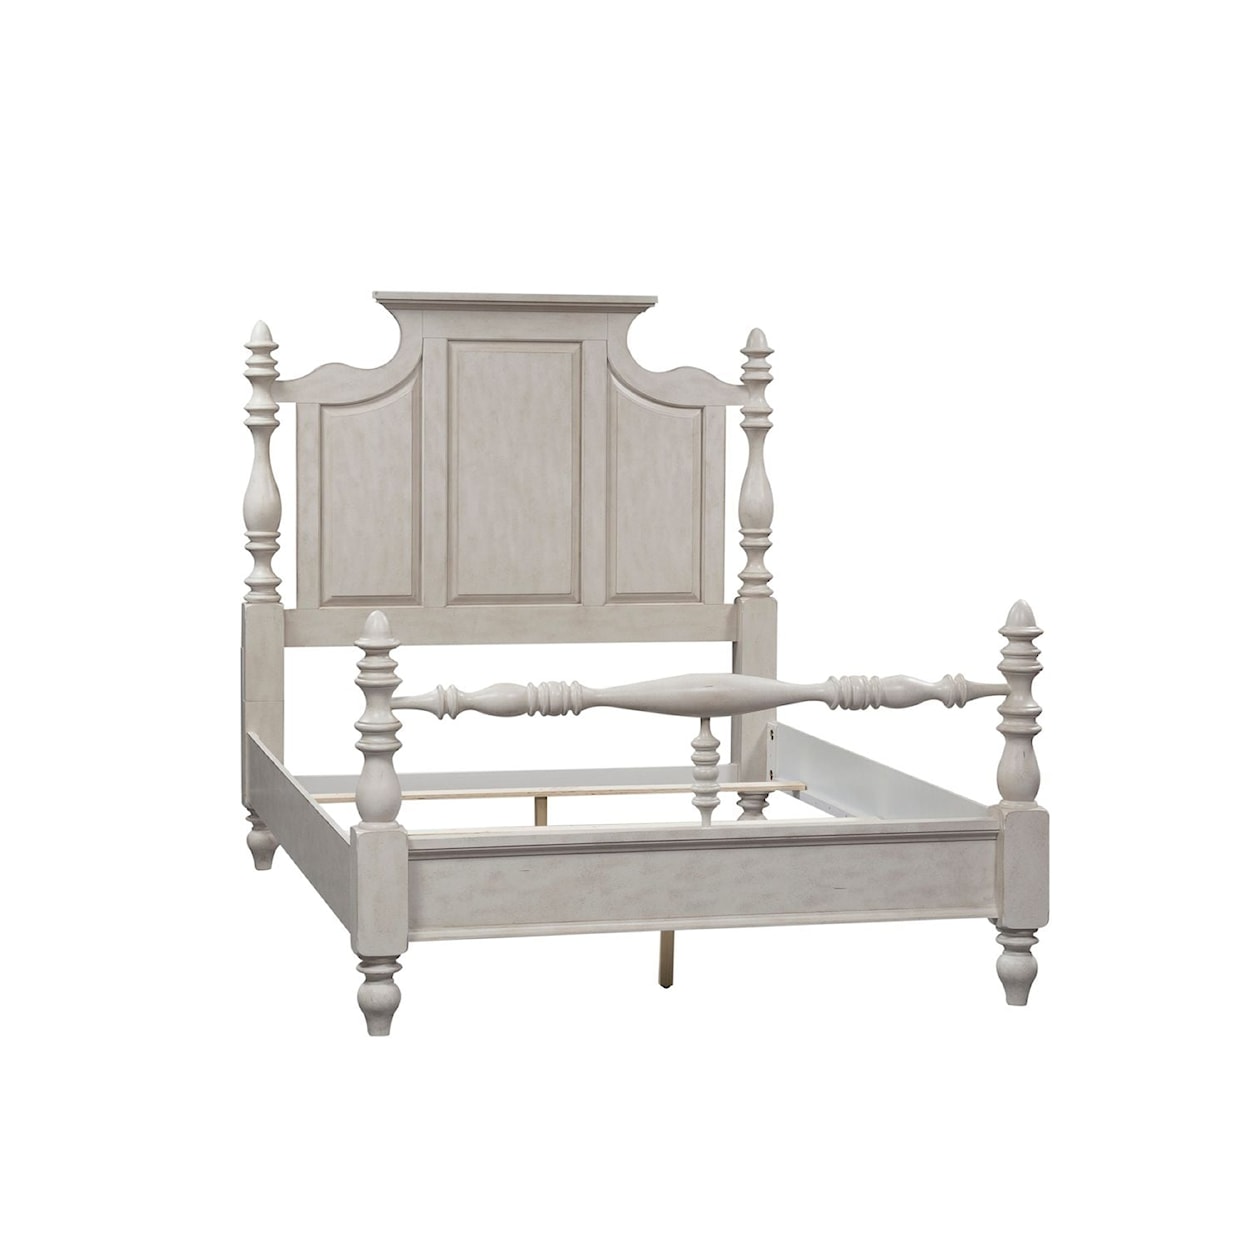 Liberty Furniture High Country King Poster Bed